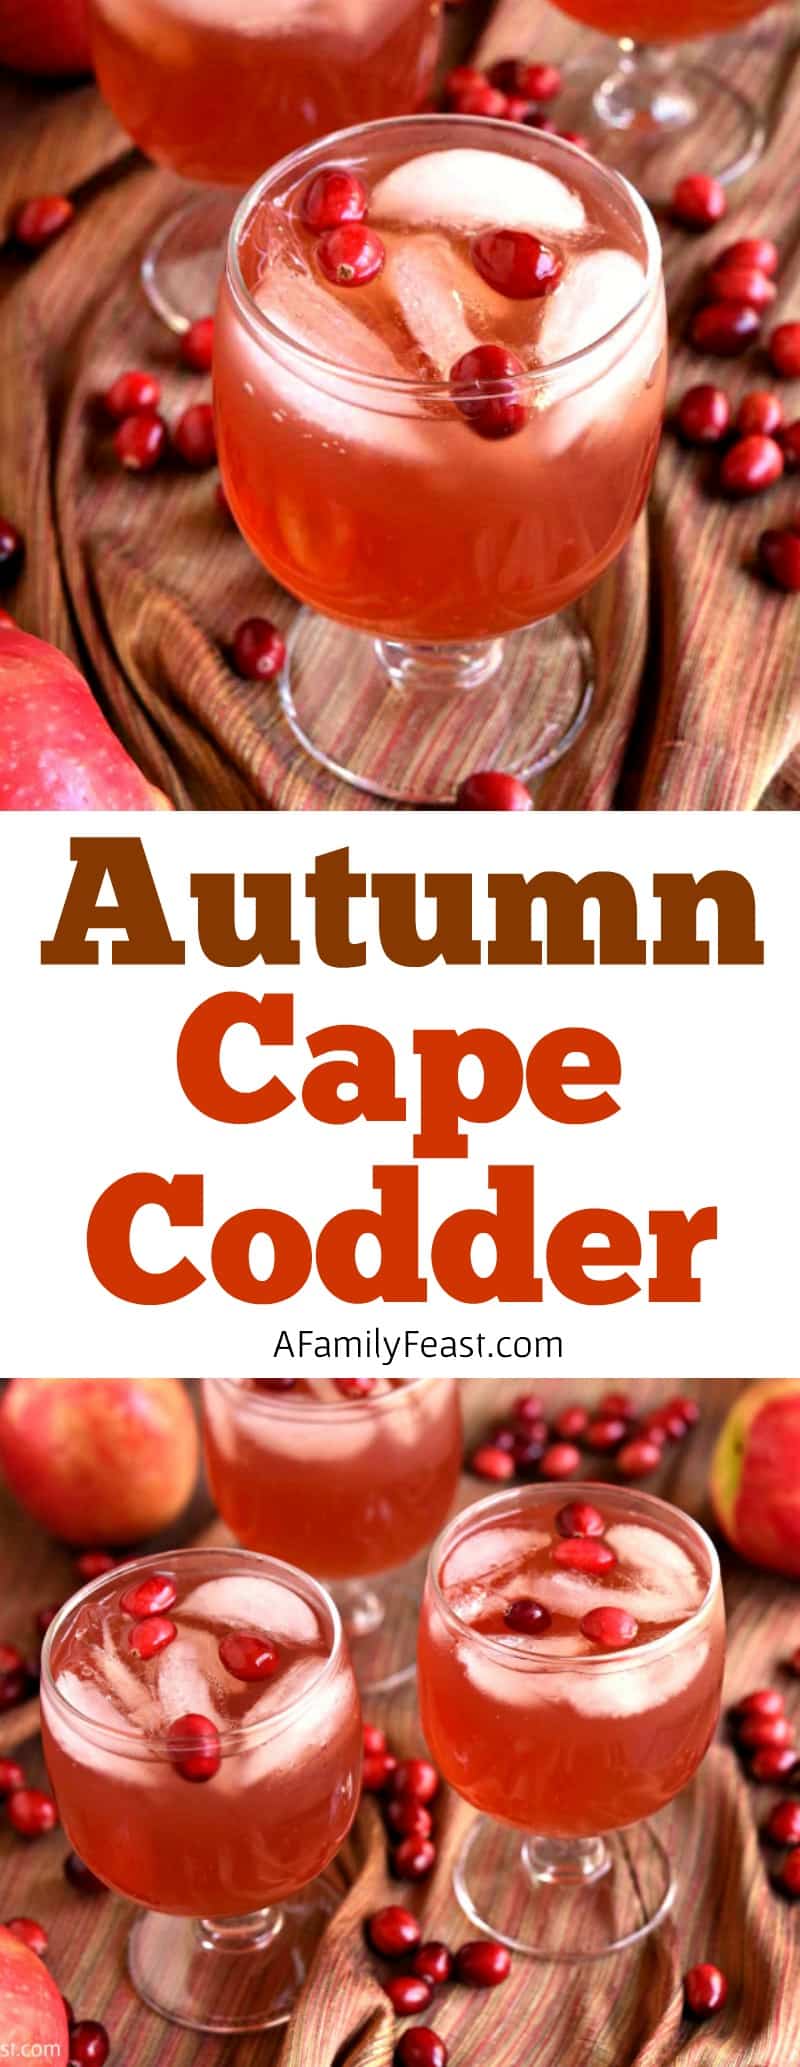 Our Autumn Cape Codder a classic cocktail updated with Fall flavors! Cranberry juice, vodka, apple cider, and apple liqueur plus fresh cranberries for garnish! (So good!)